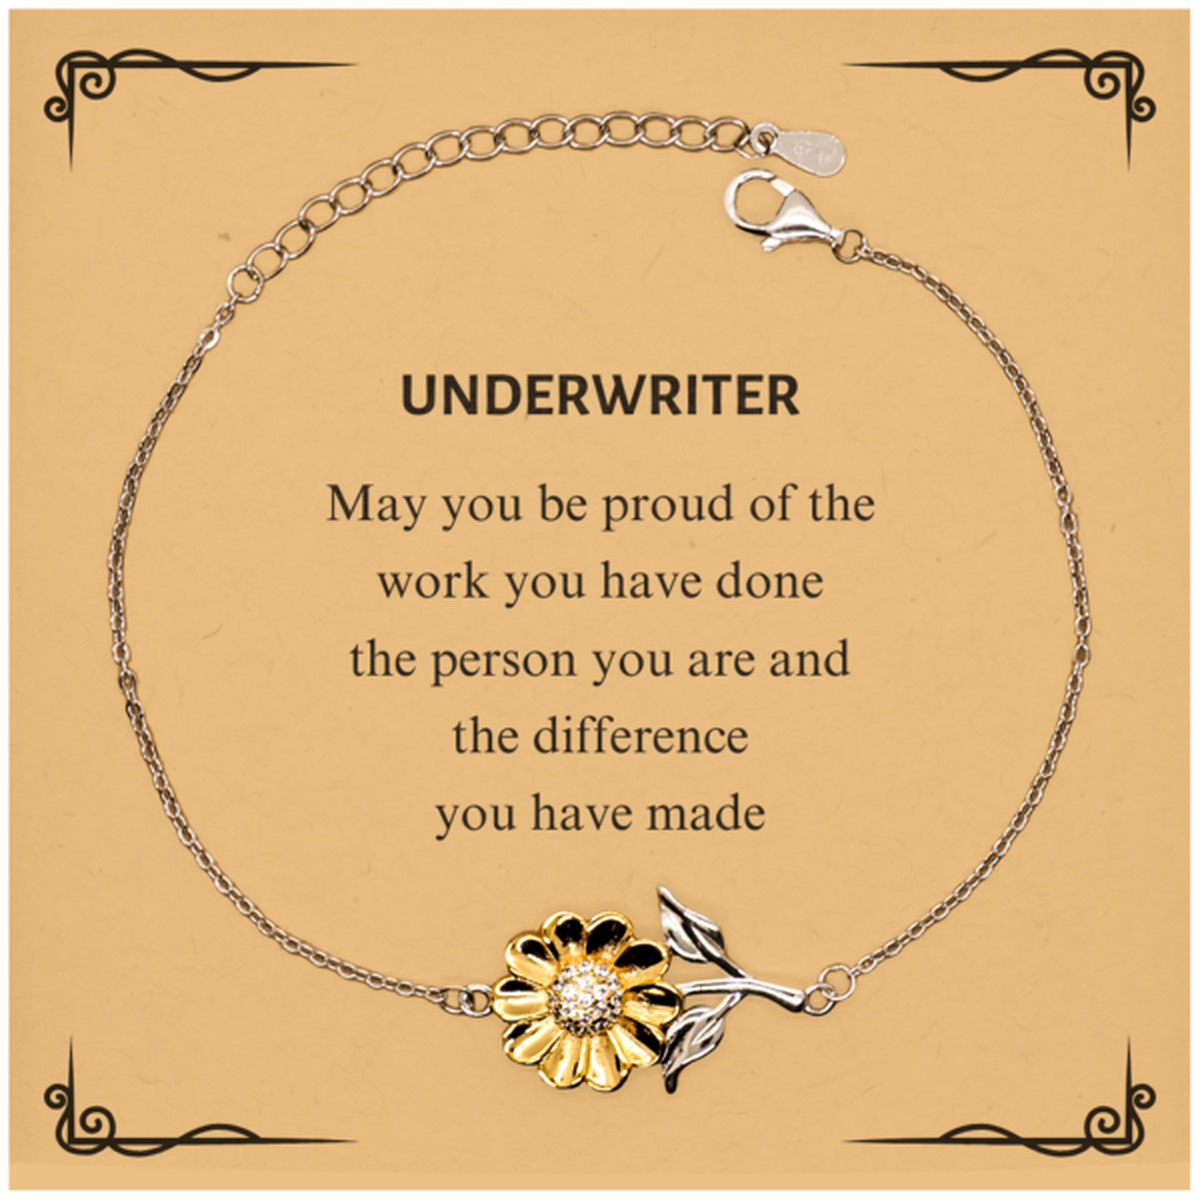 Underwriter May you be proud of the work you have done, Retirement Underwriter Sunflower Bracelet for Colleague Appreciation Gifts Amazing for Underwriter